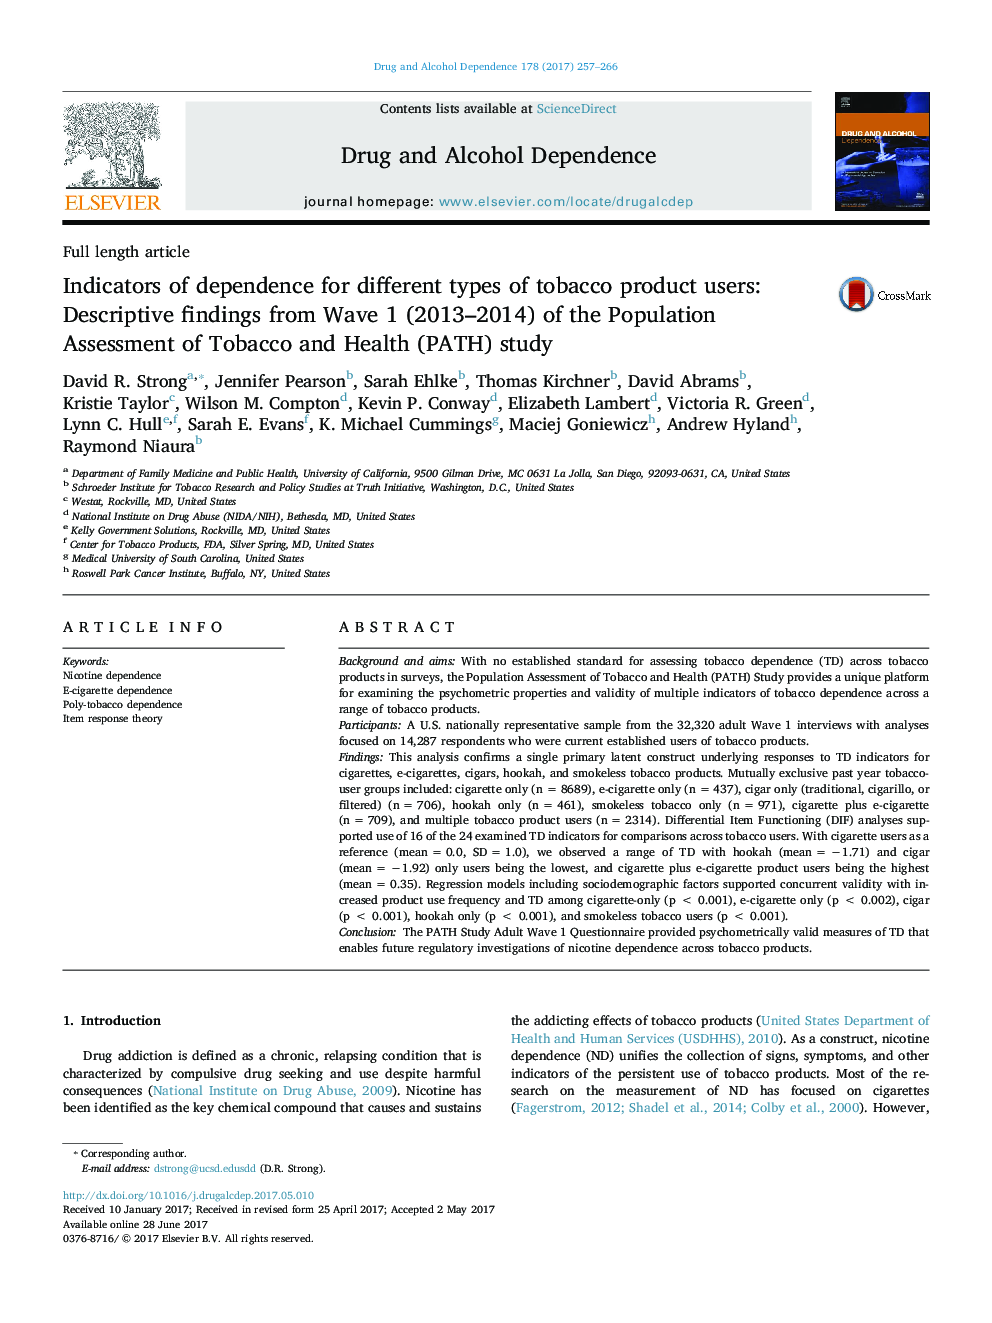 Indicators of dependence for different types of tobacco product users: Descriptive findings from Wave 1 (2013-2014) of the Population Assessment of Tobacco and Health (PATH) study